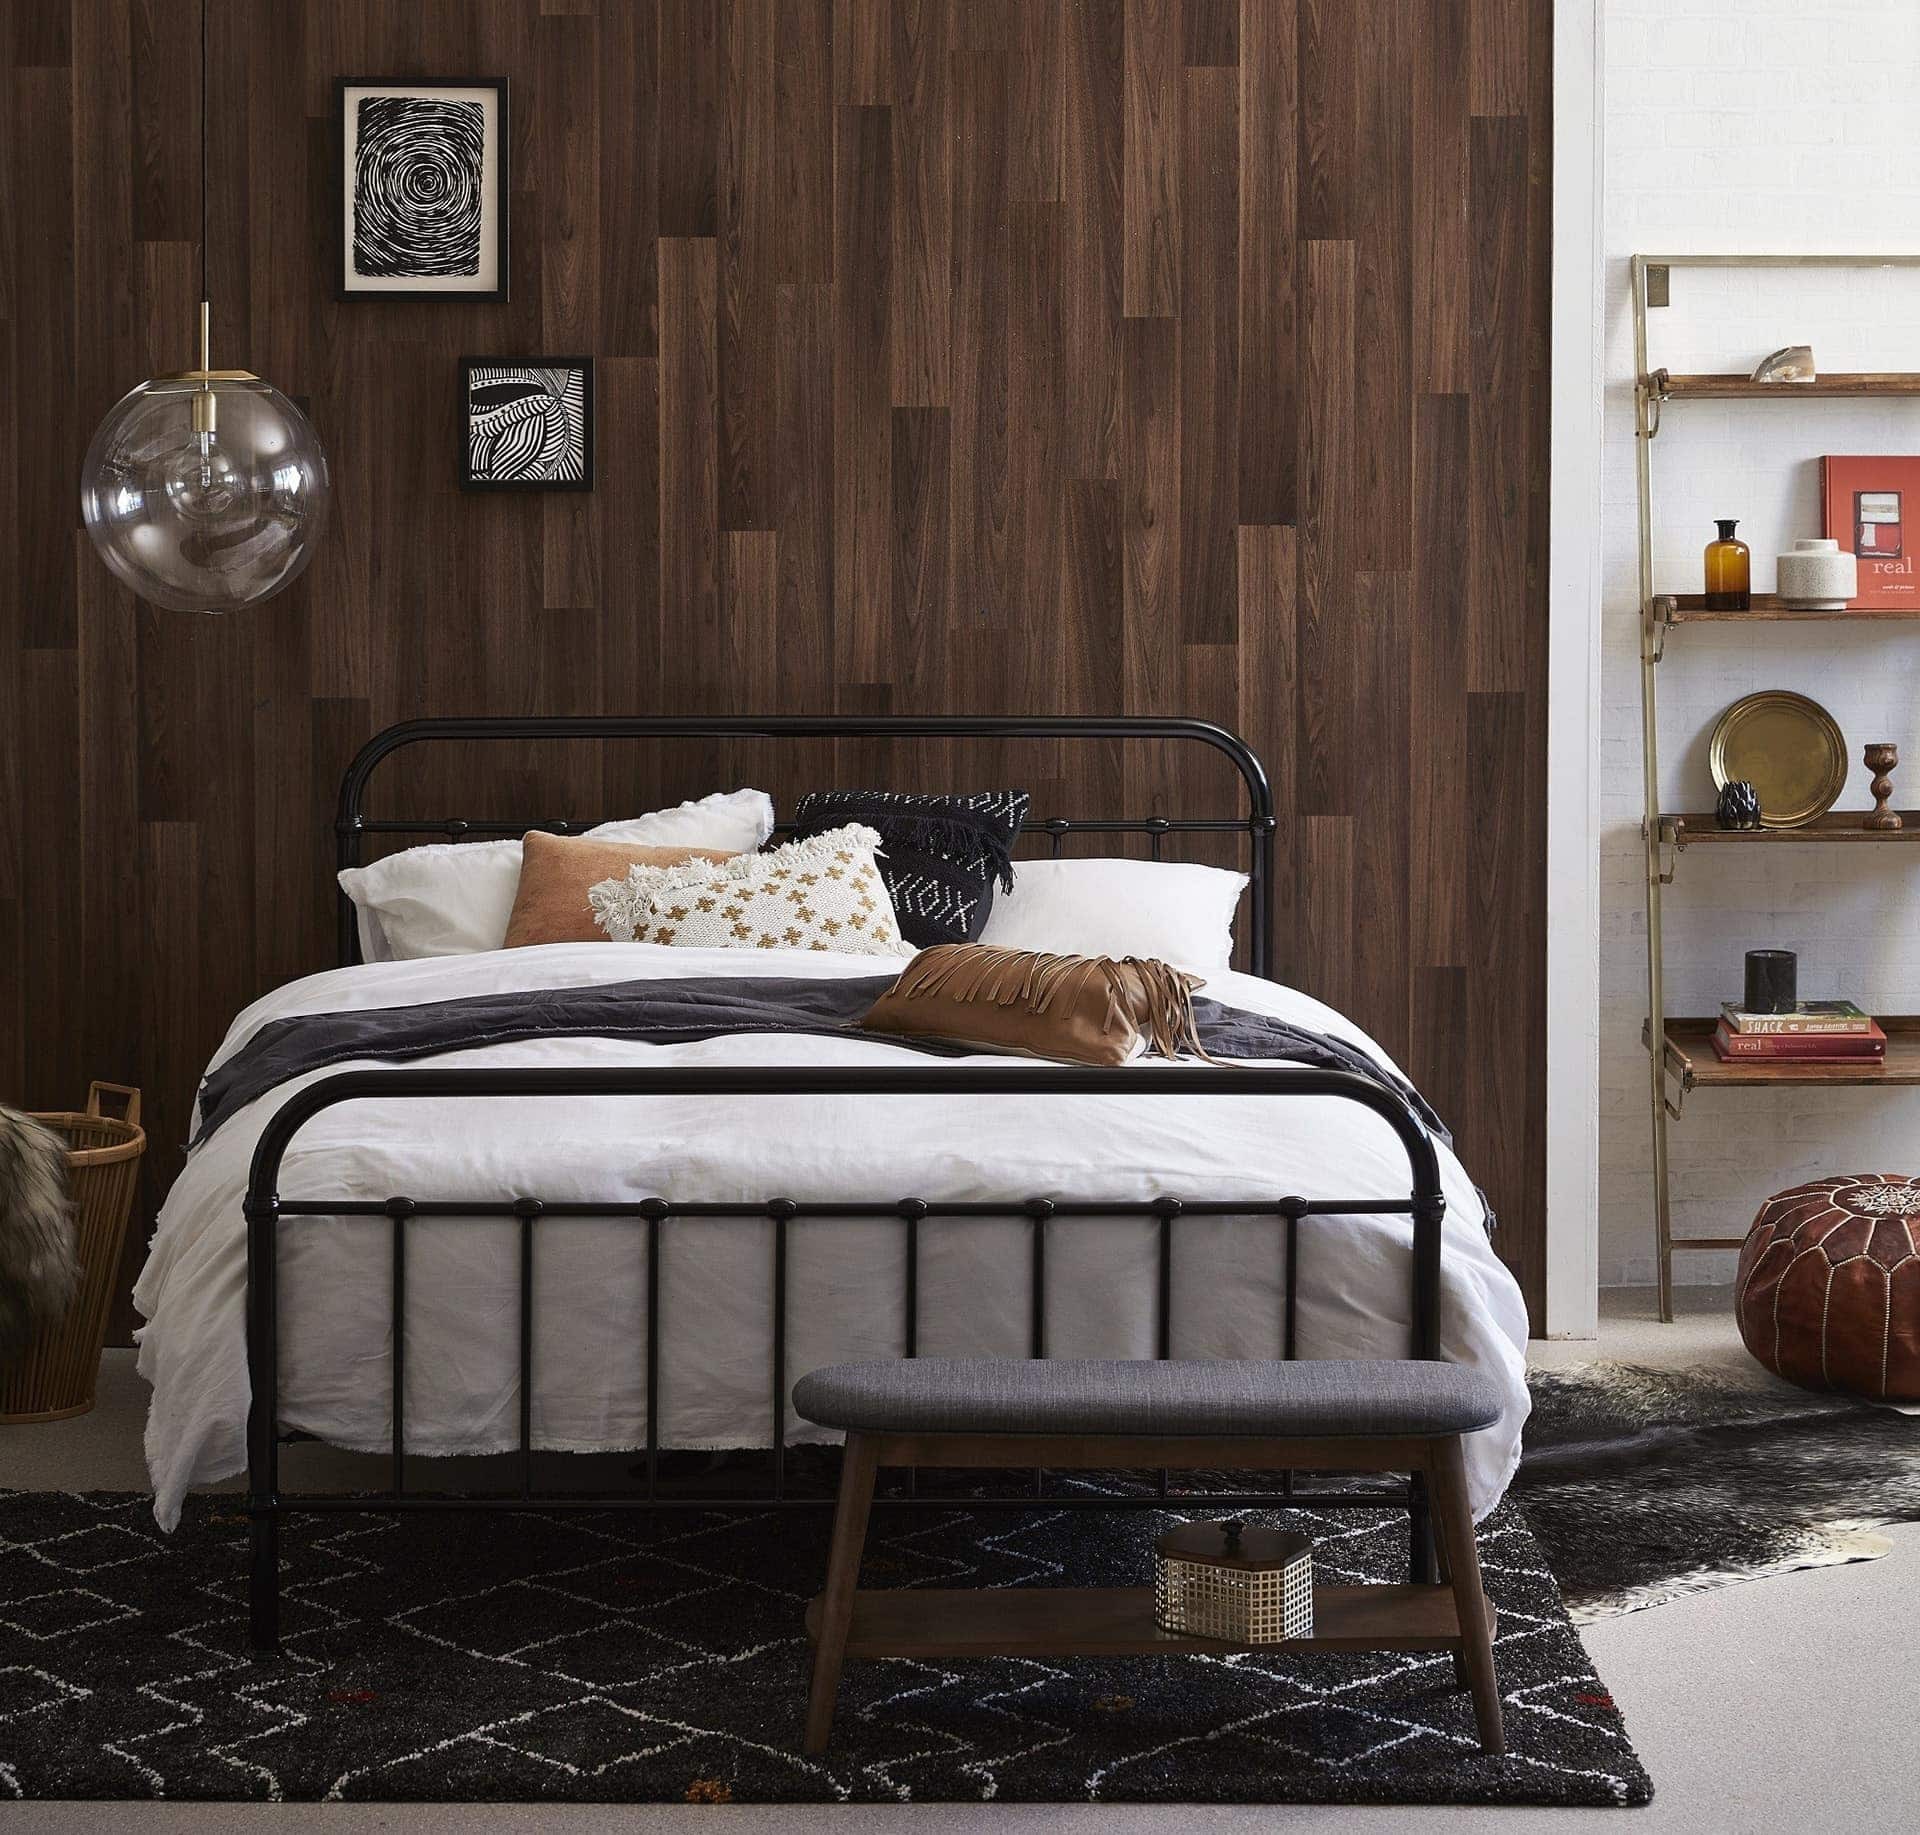 black metal bed frame in bedroom with brown timber wall panels and black diamond rug